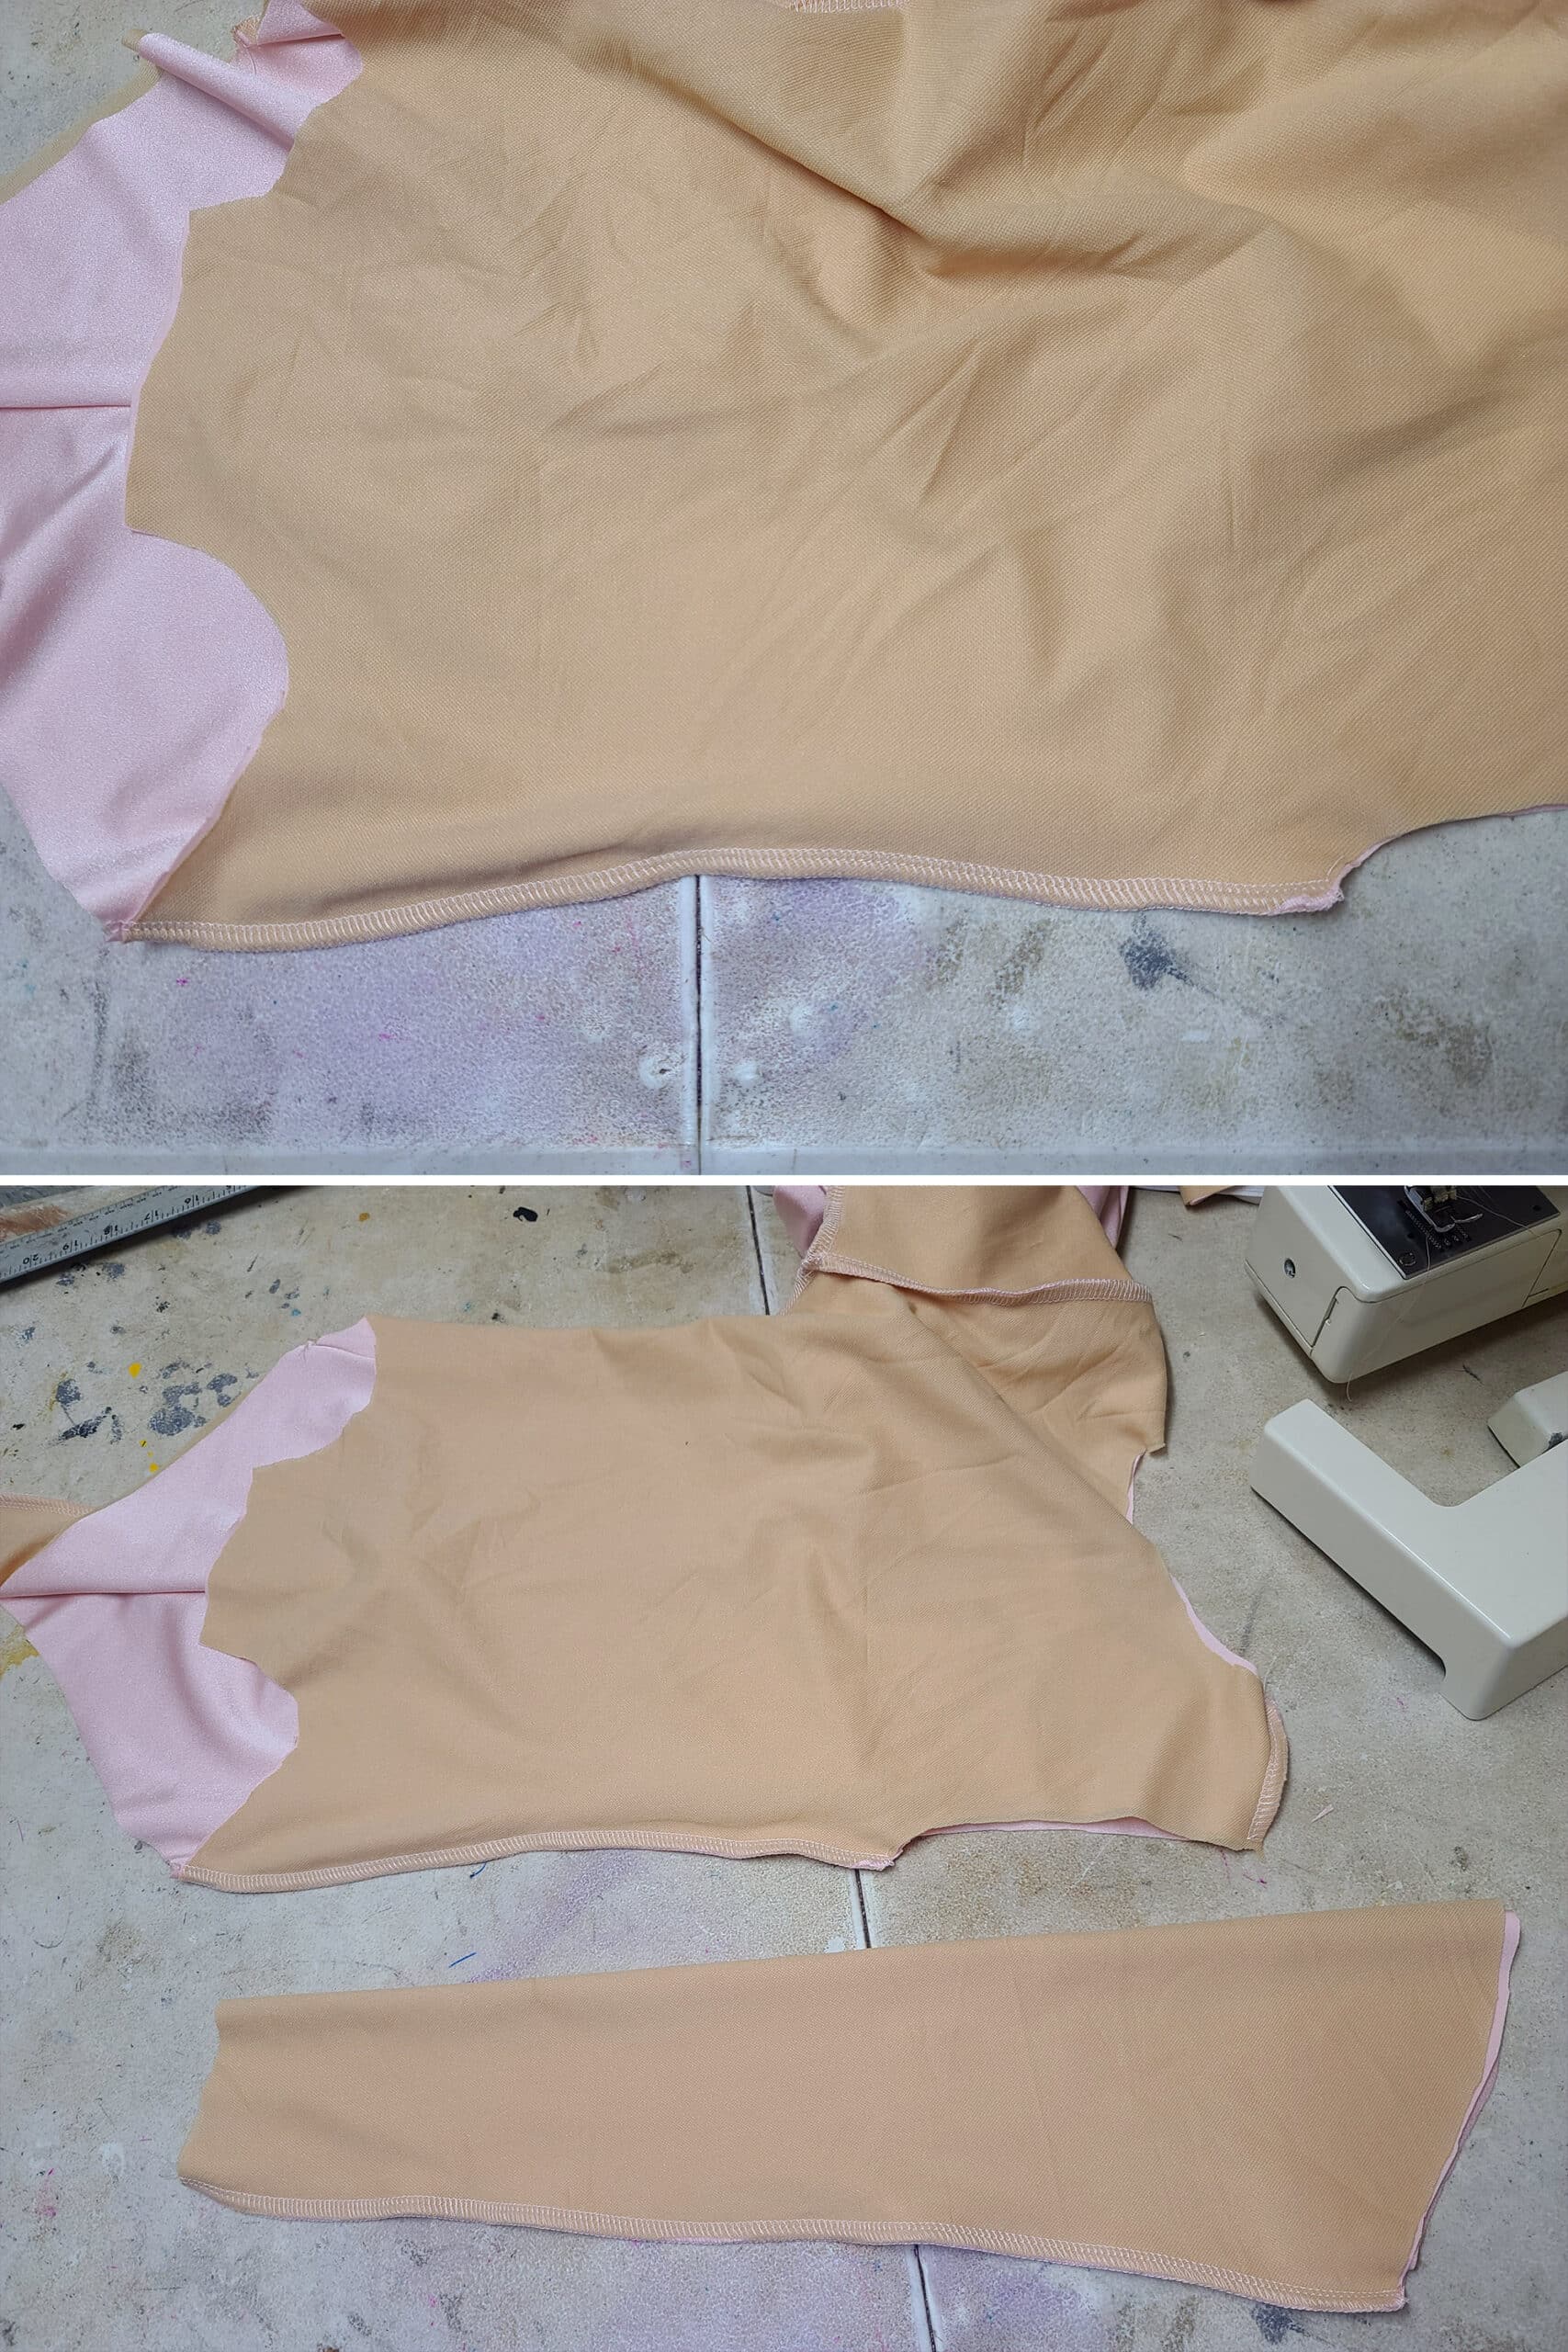 2 part image showing the side seam sewn on a bodysuit, then the sleeve seam sewn on a sleeve, separately.